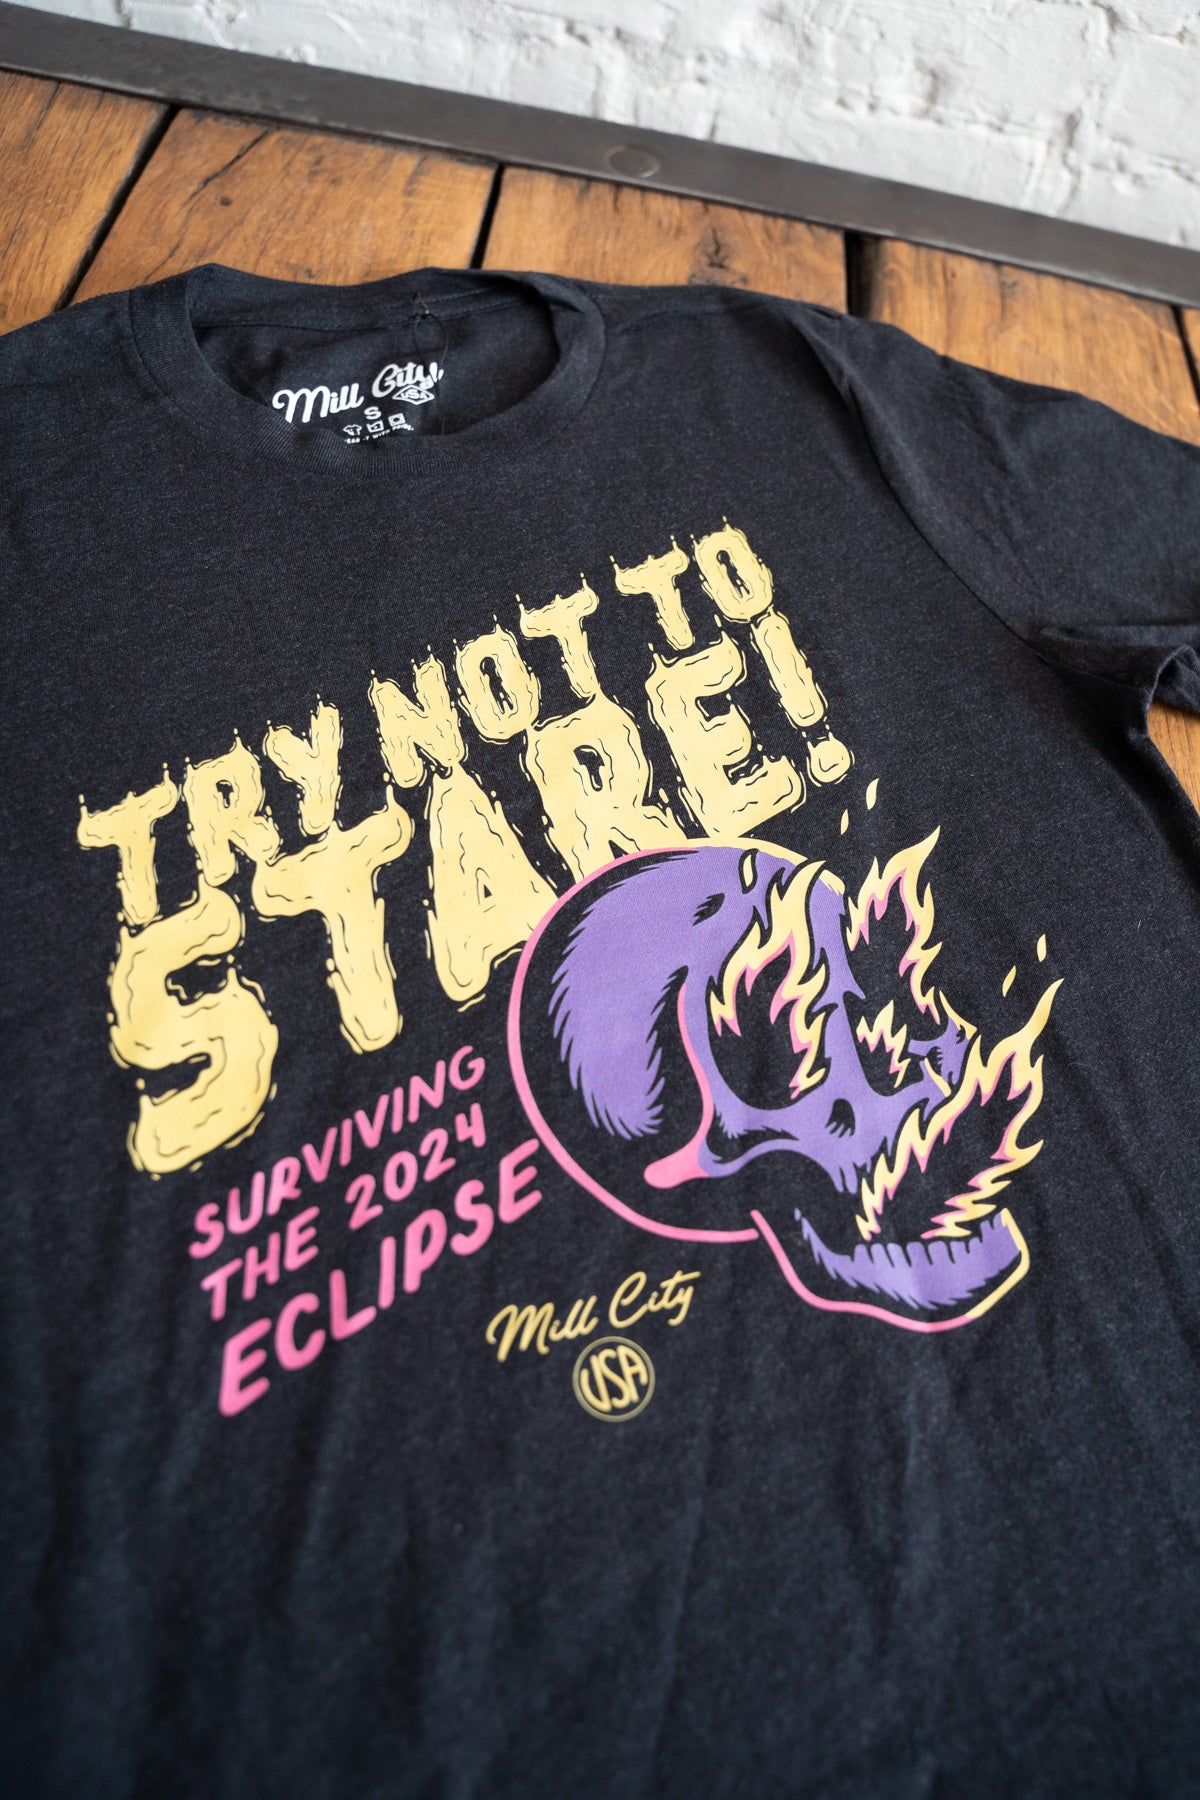 Try Not To Stare! Tee